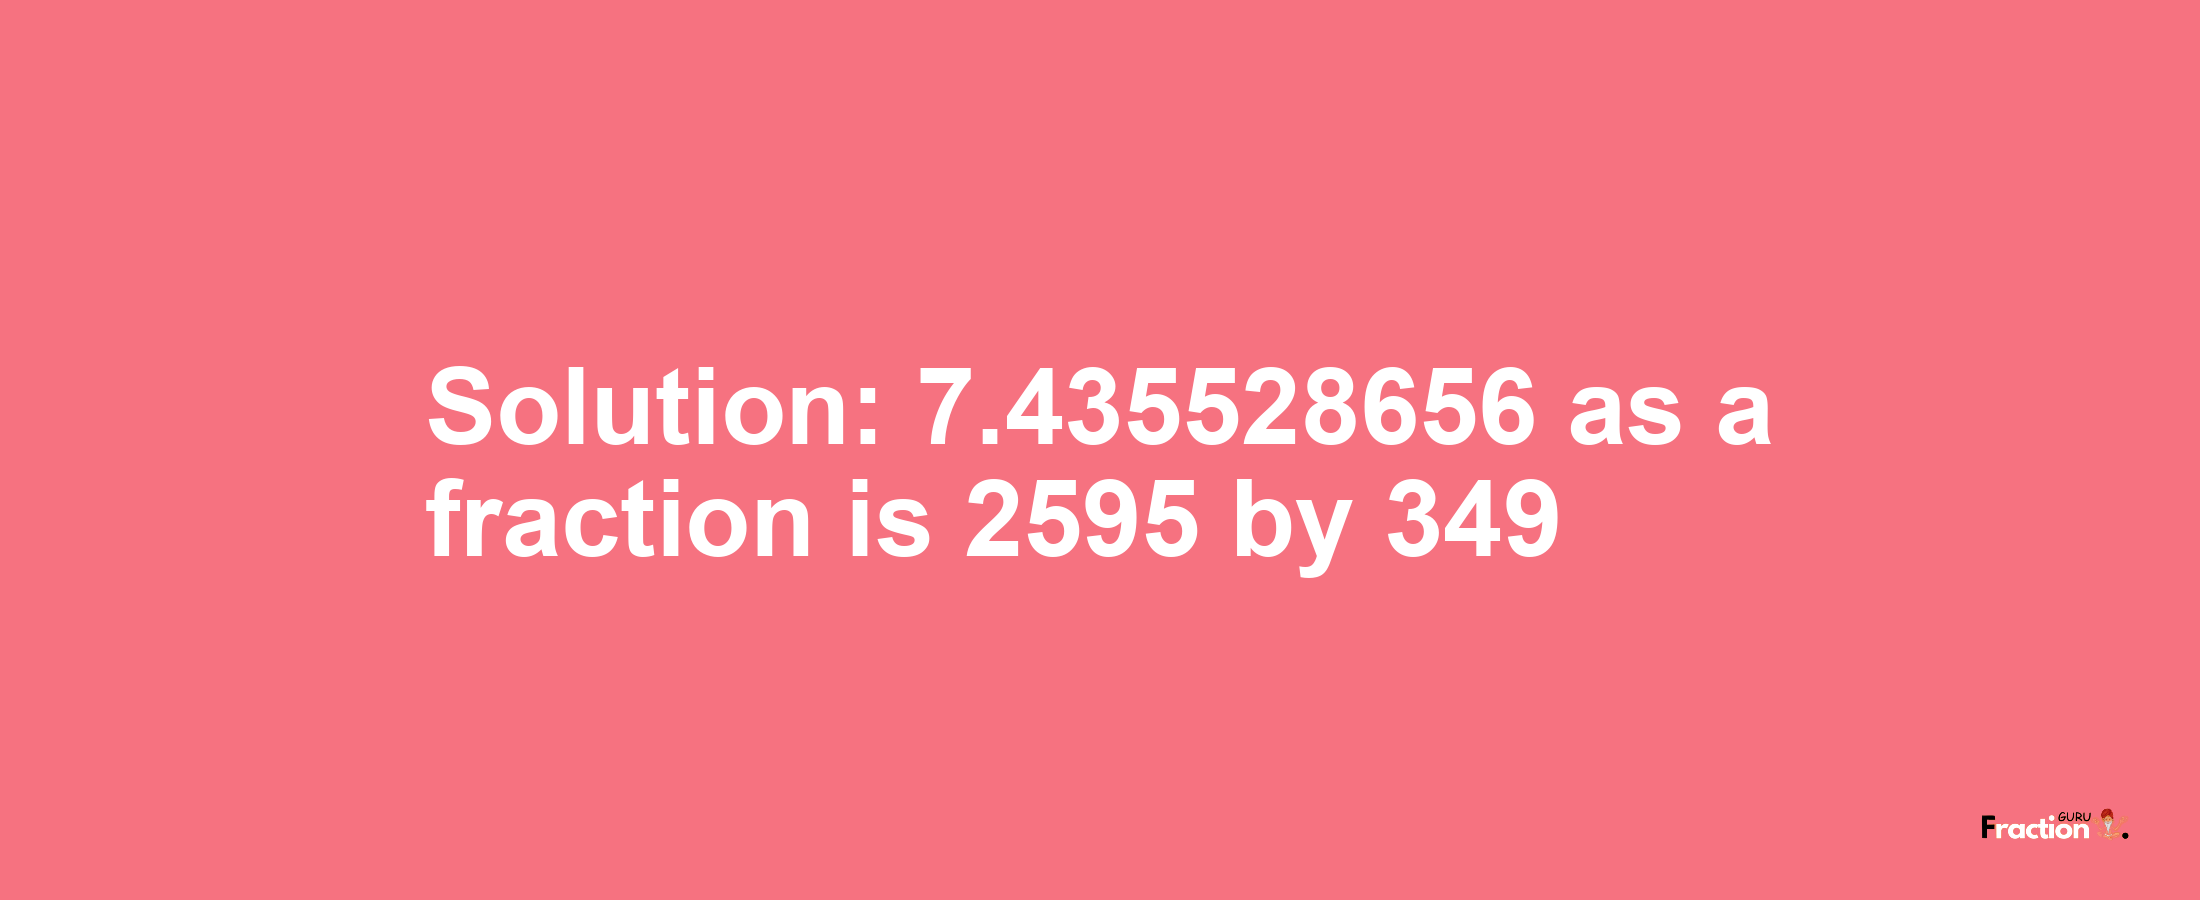 Solution:7.435528656 as a fraction is 2595/349